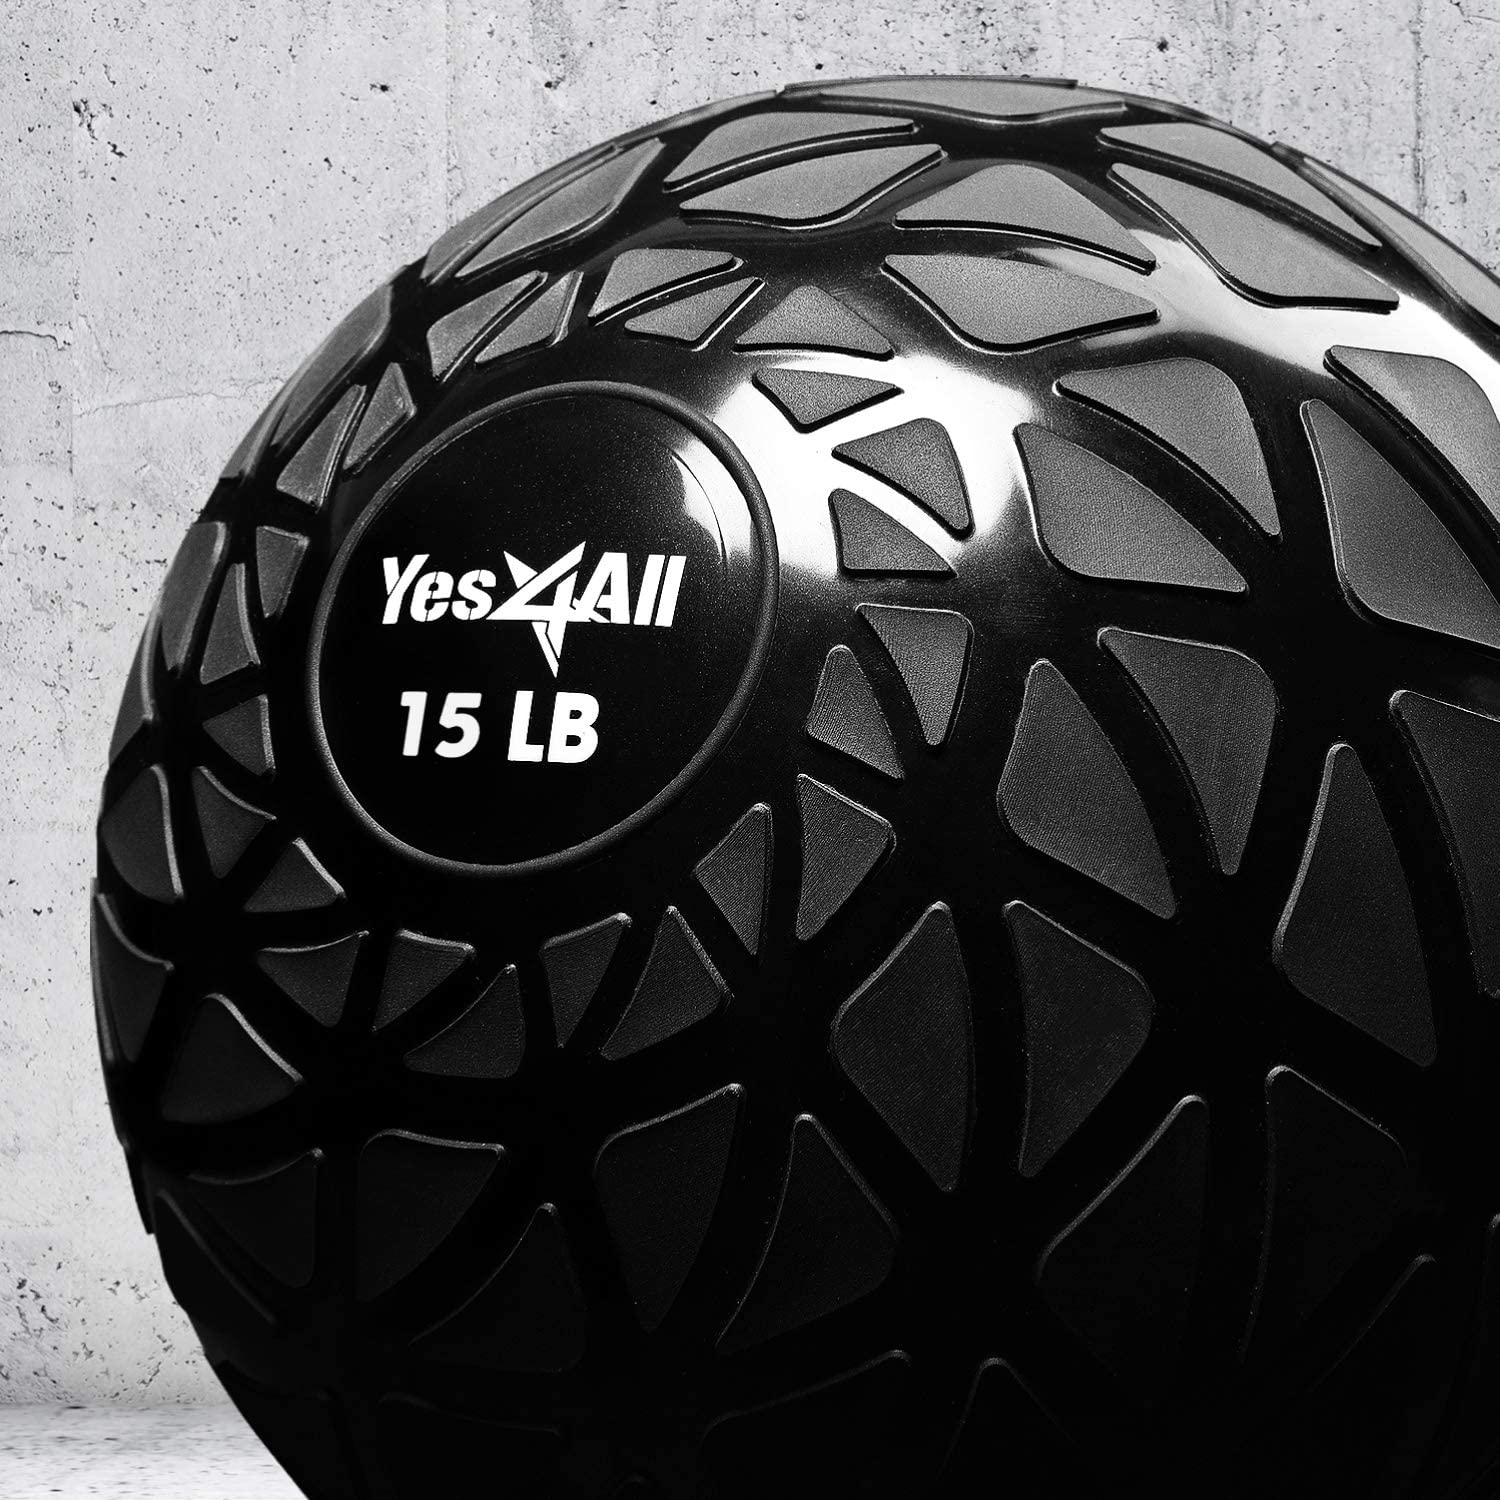 Yes4All 15lbs Dynamic Slam Ball Black - image 5 of 7